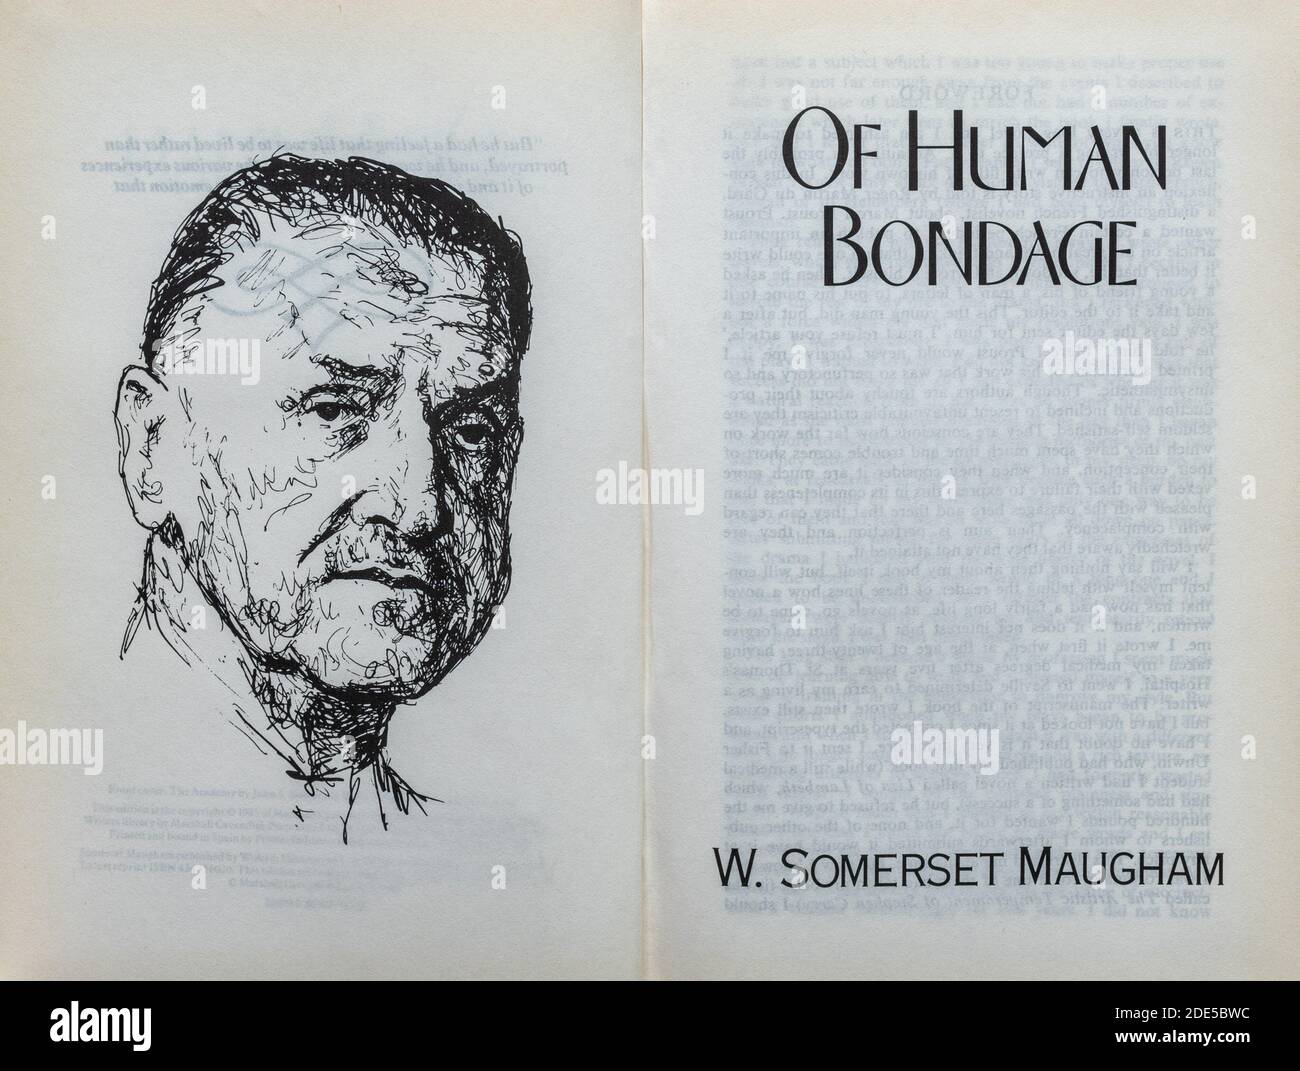 Of Human Bondage book - novel by W. Somerset Maugham. Title page and drawing of the author. Stock Photo